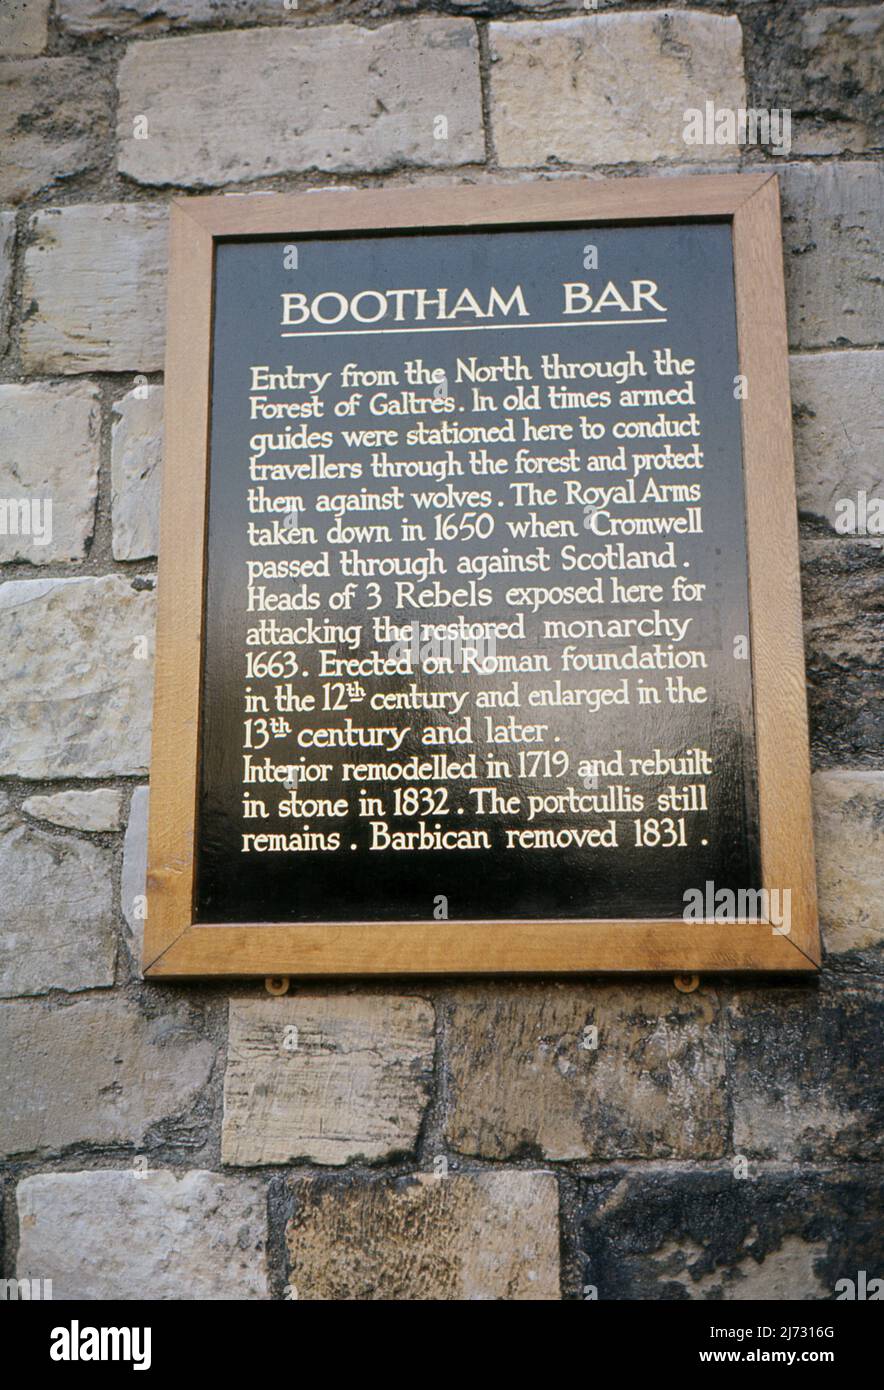 A sign attached to the wall of Bootham Bar, an imposing stone gateway way in York, North Yorkshire.  1967. The Sign provides the following history: “Bootham Bar: Entry from the North through the Forest of Galtres . In old times armed guides were stationed here to conduct travellers through the forest and protect them against wolves .The Royal Arms taken down in 1650 when Cromwell passed through against Scotland . Heads of 3 Rebels exposed here for attacking the restored monarchy 1663. Erected on Roman foundation in the 12th century and enlarged in the 13th century and later.......' Stock Photo